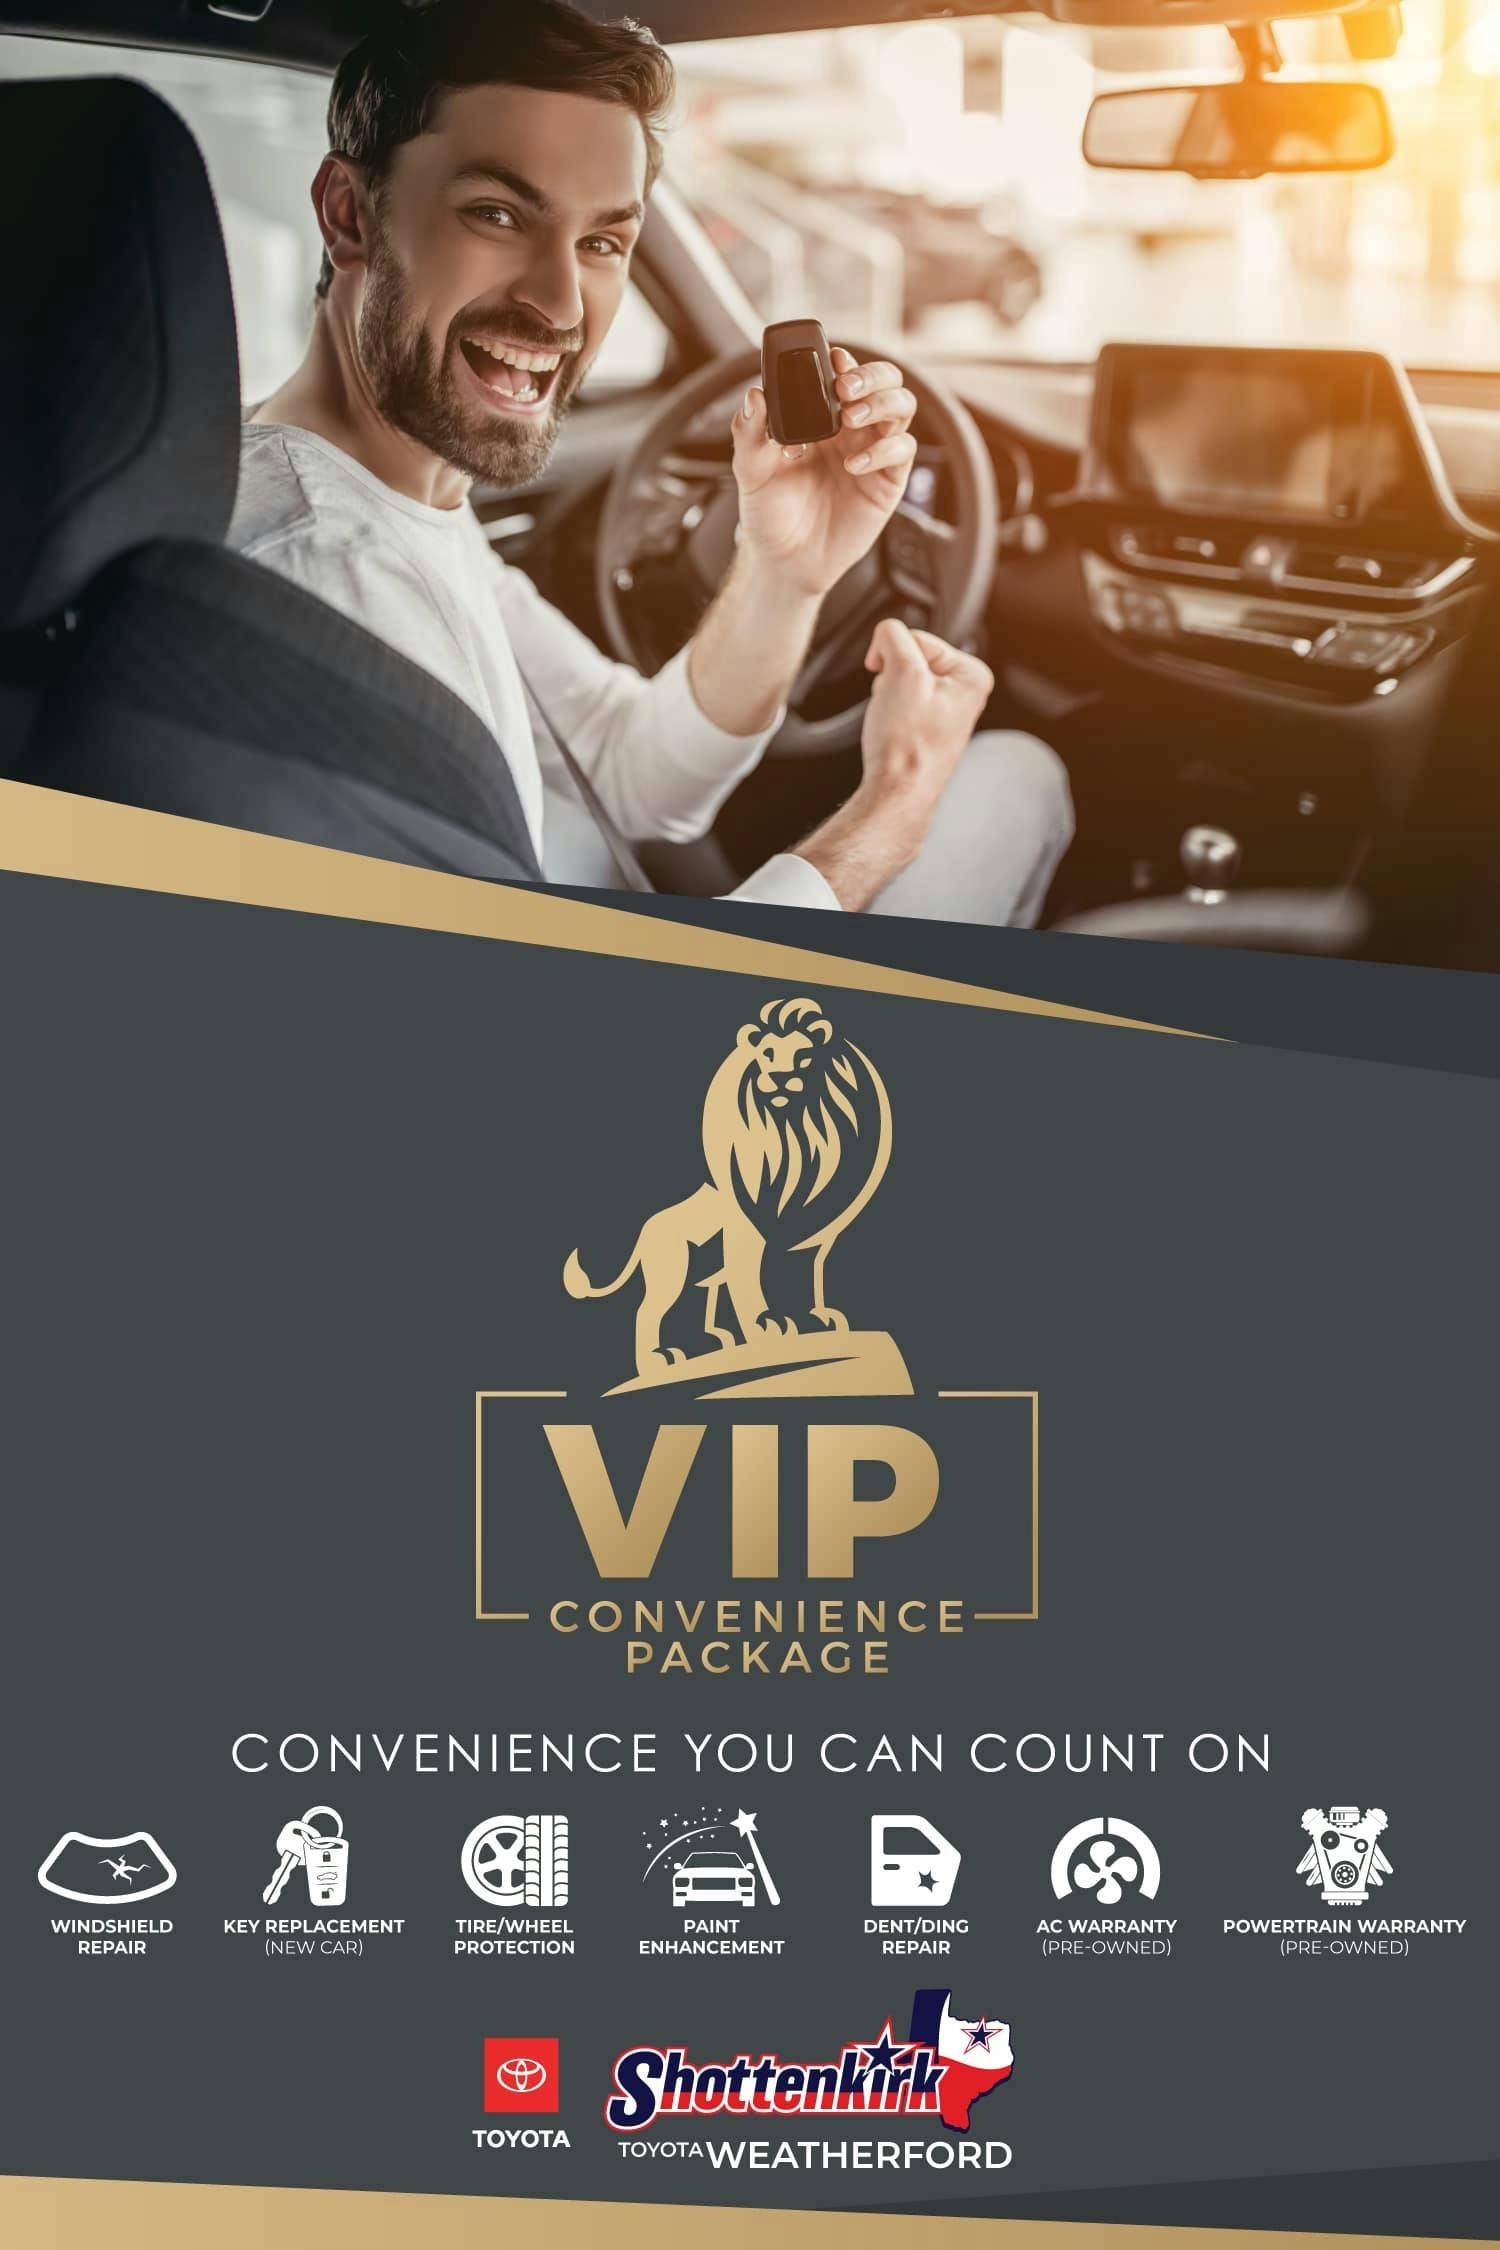 VIP Convenience Package image